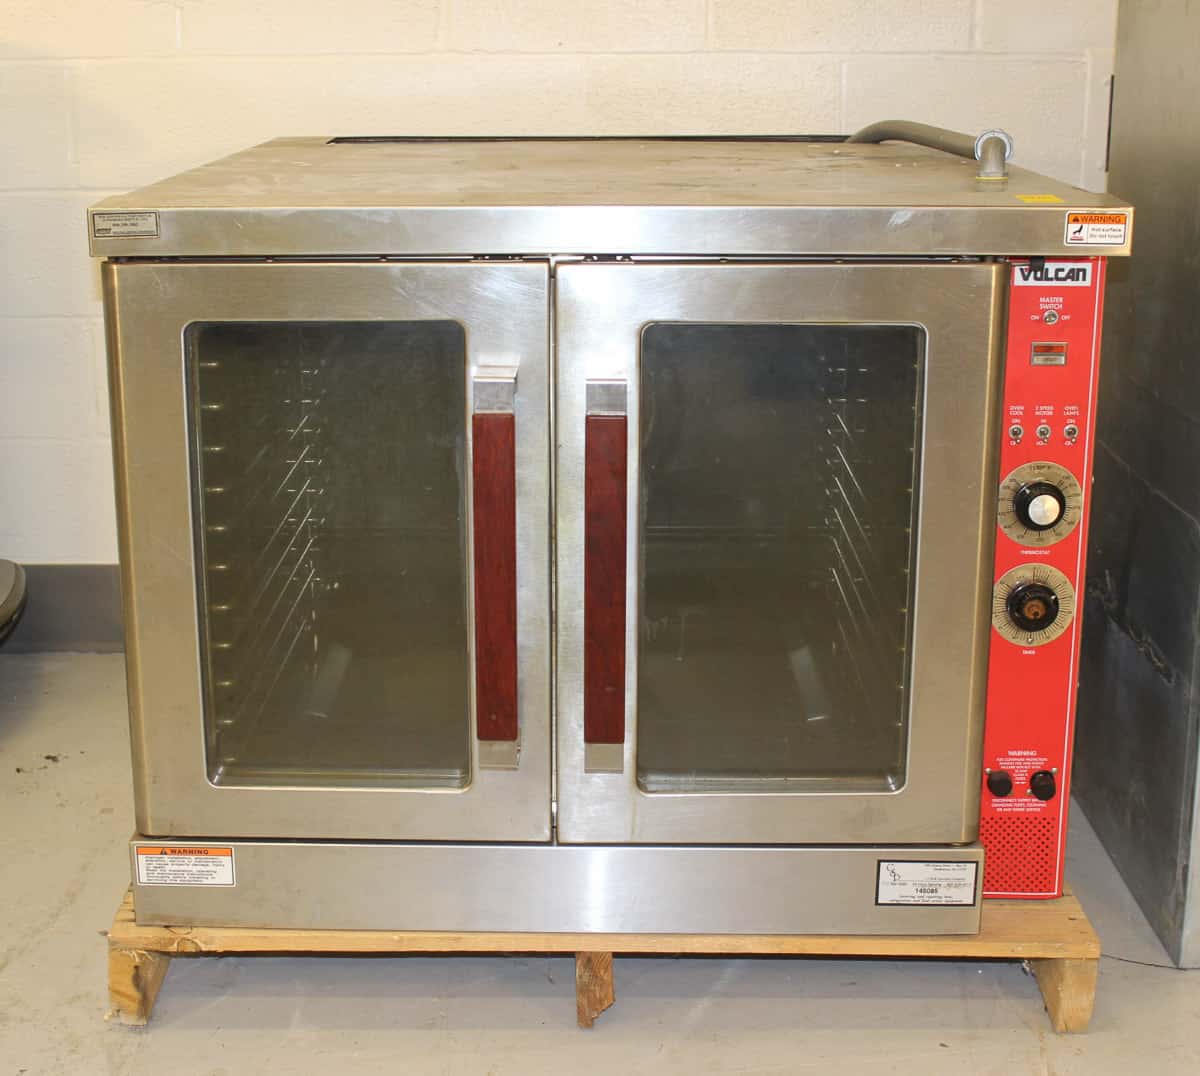 A commercial Vulcan convection oven with double glass doors and red control knobs, placed on a wooden stand.